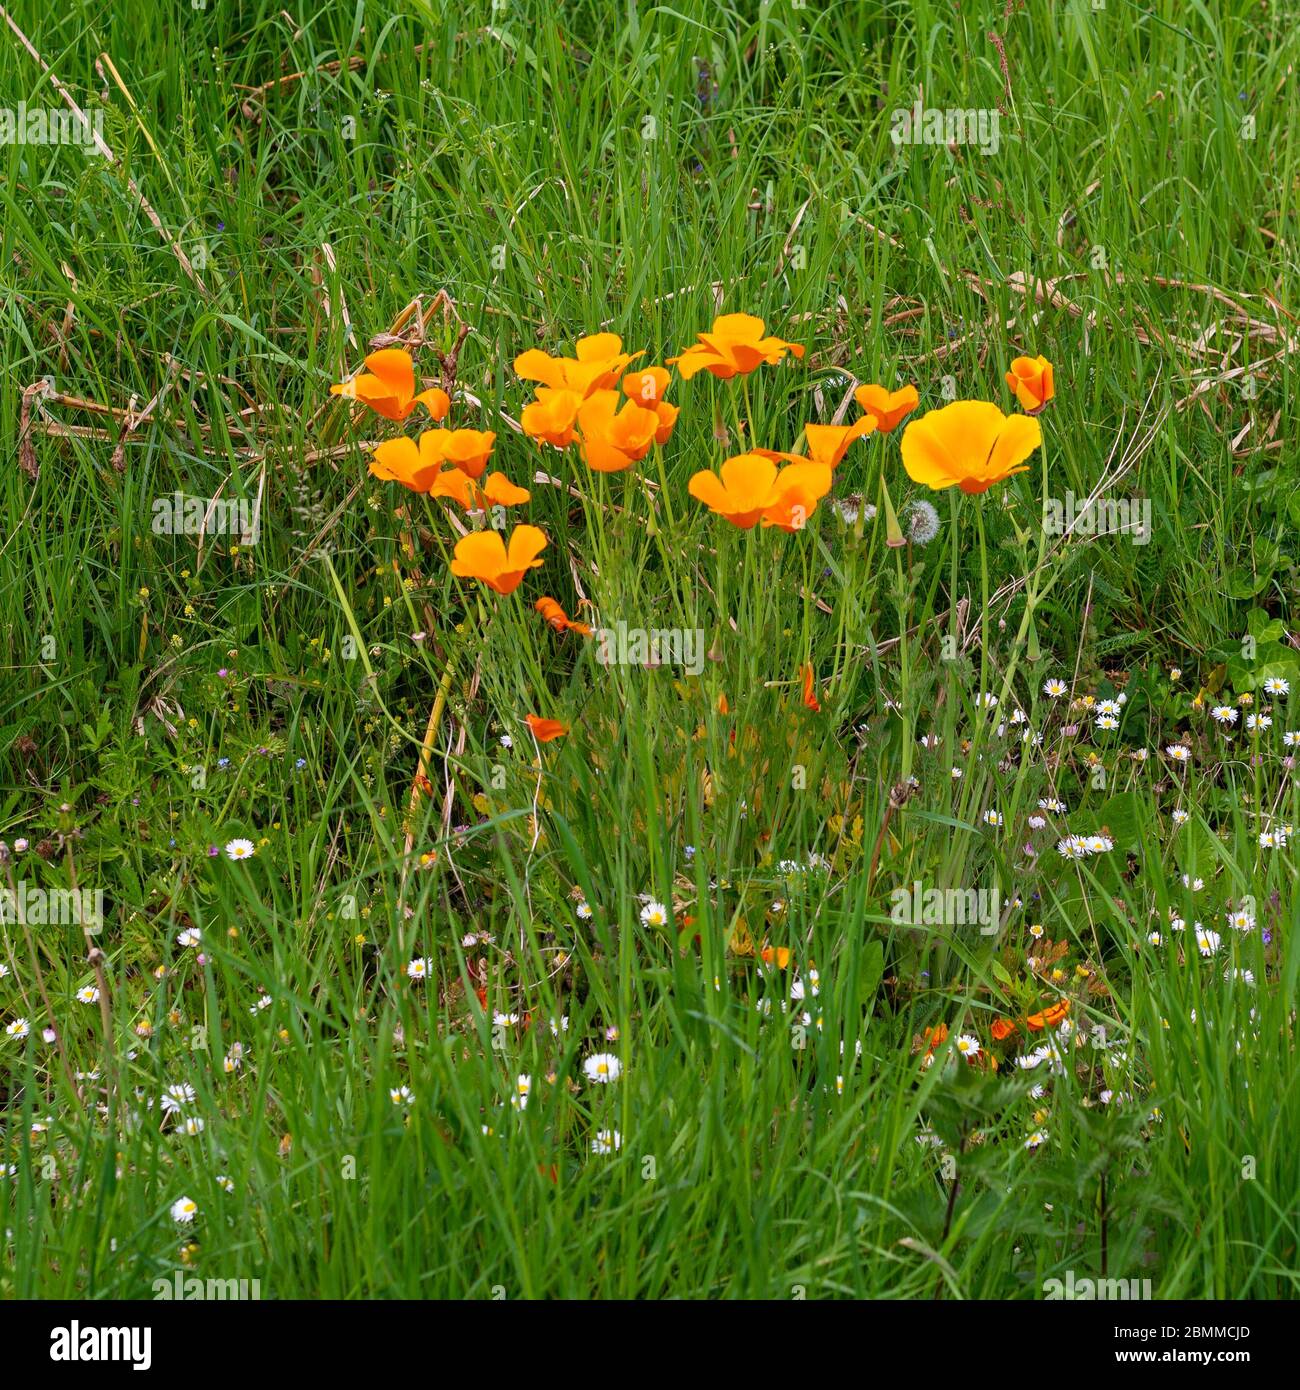 Orange California poppies growing wild on a roadside grass verge in the UK Stock Photo